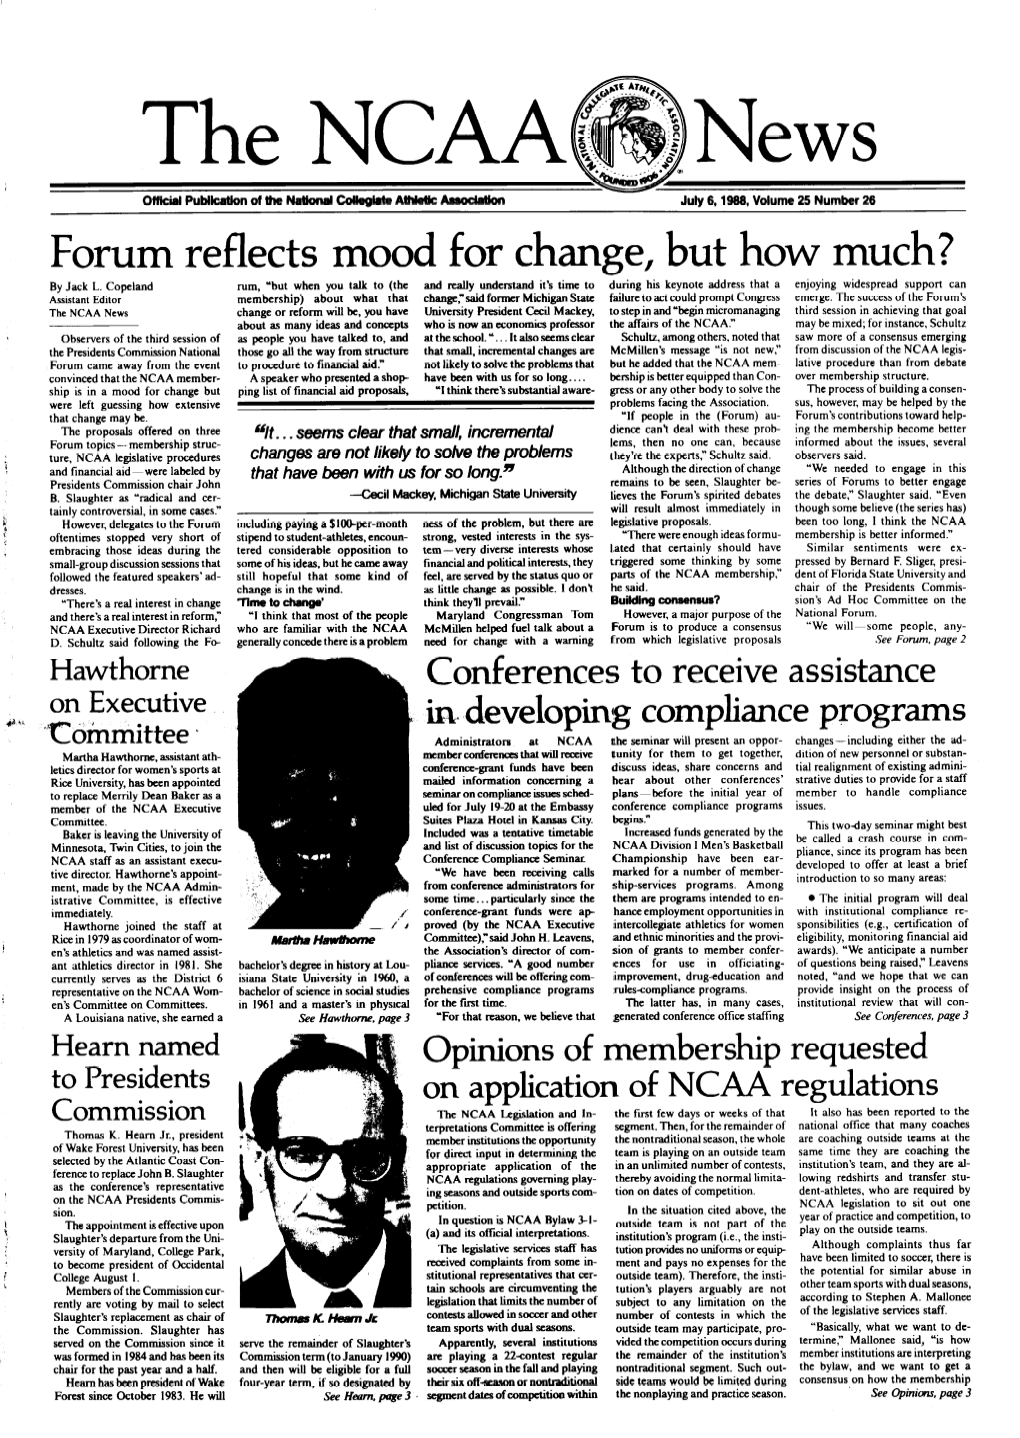 Forum Reflects Mood for Change, but How Much? by Jack L